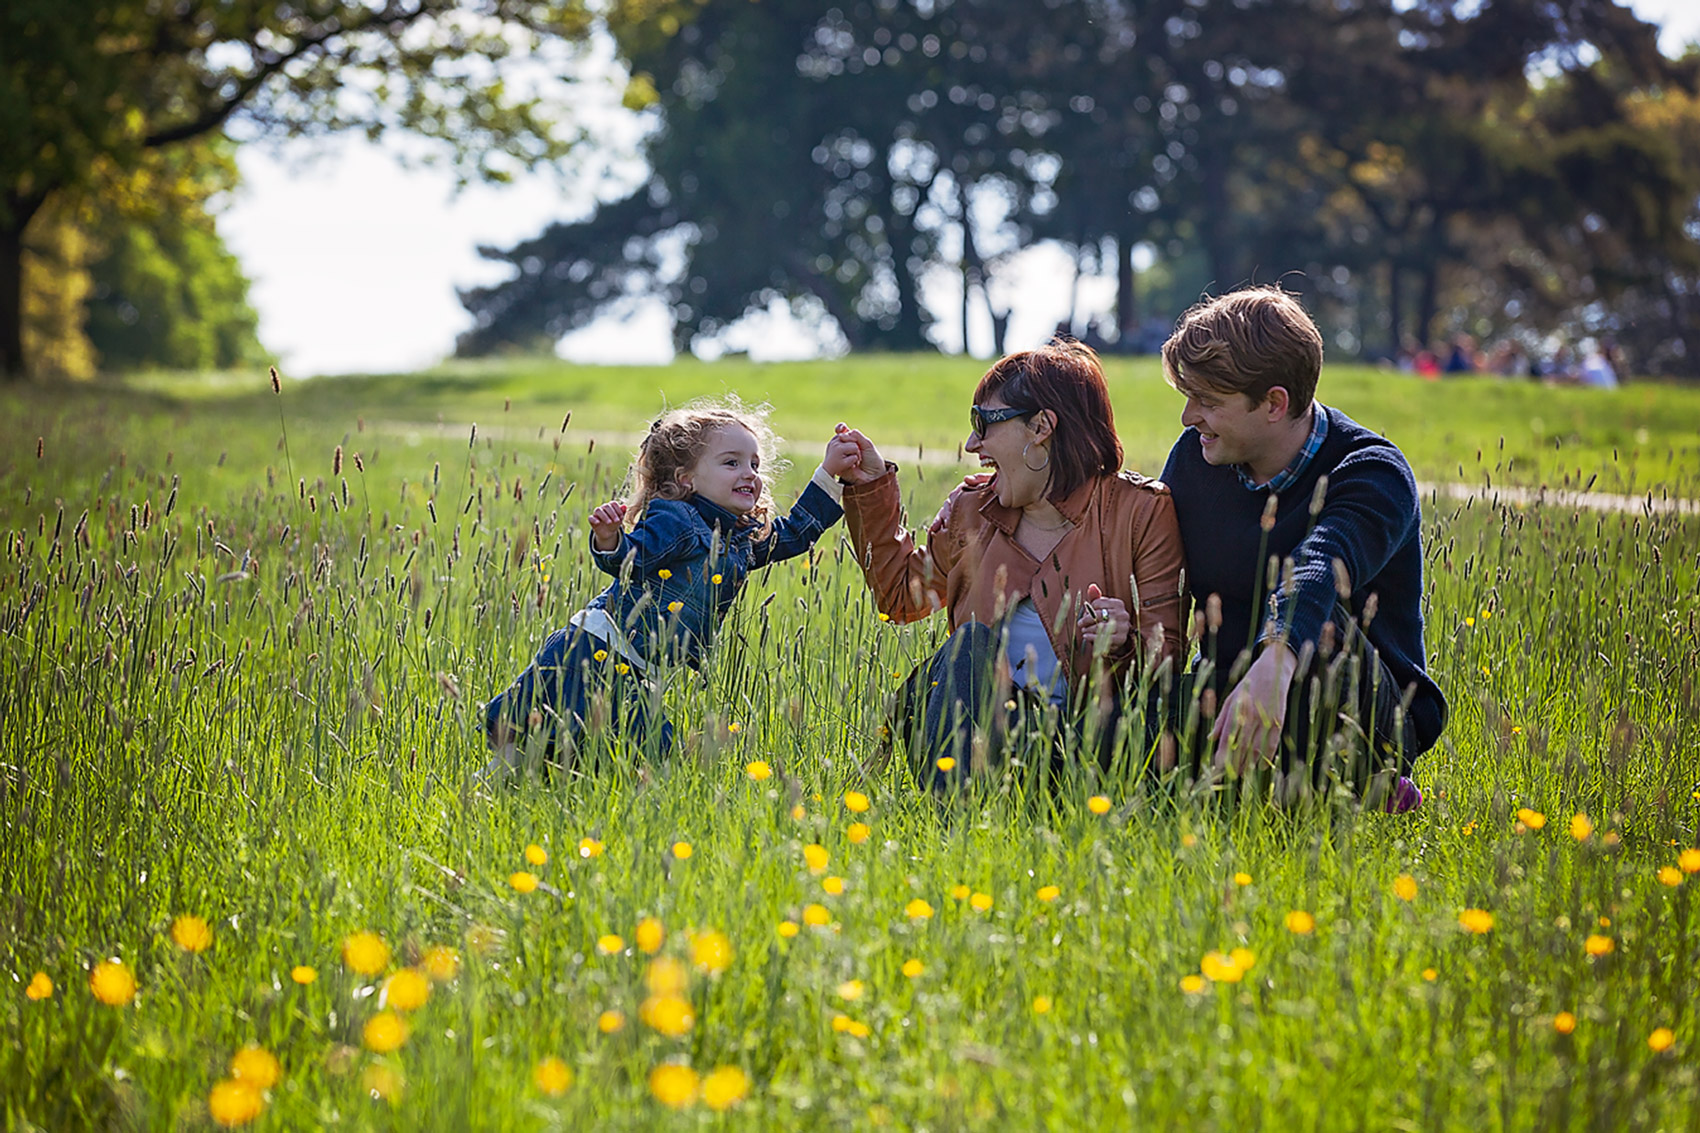 Family lifestyle portrait of young woman with young daughter and man in green fields during summer